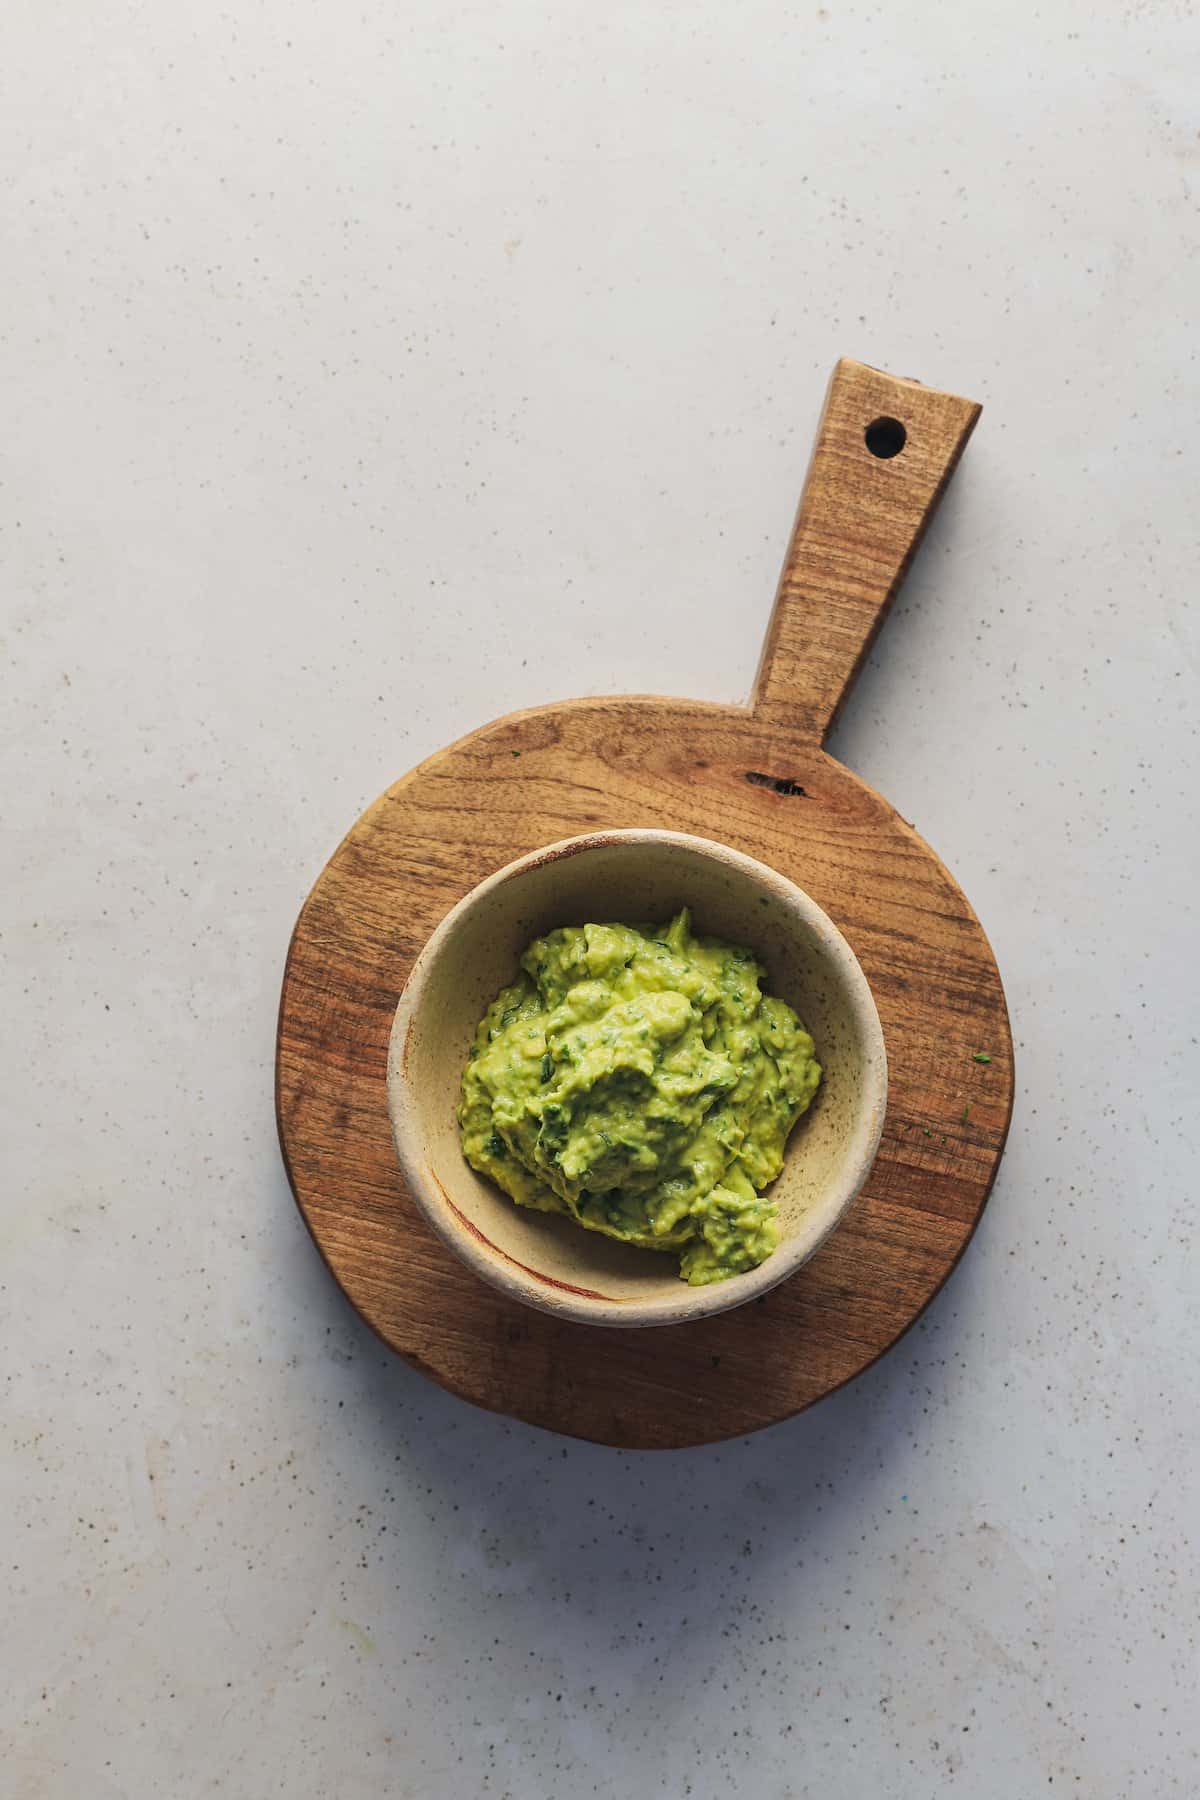 A small bowl of guacamole on top of a round wooden stand with a handle